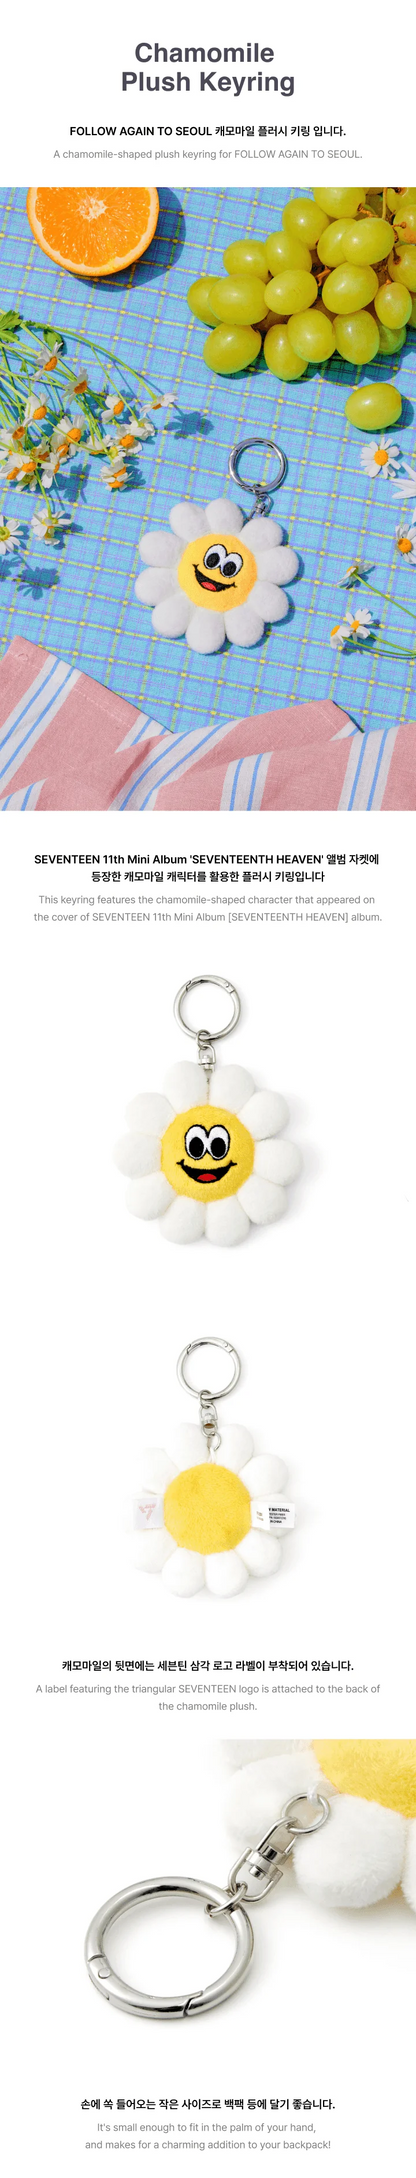 [PRE ORDER] SEVENTEEN - TouR [FOLLOW] Again in SEOUL (Official MD) / CHAMOMILE PLUSH KEYRING 